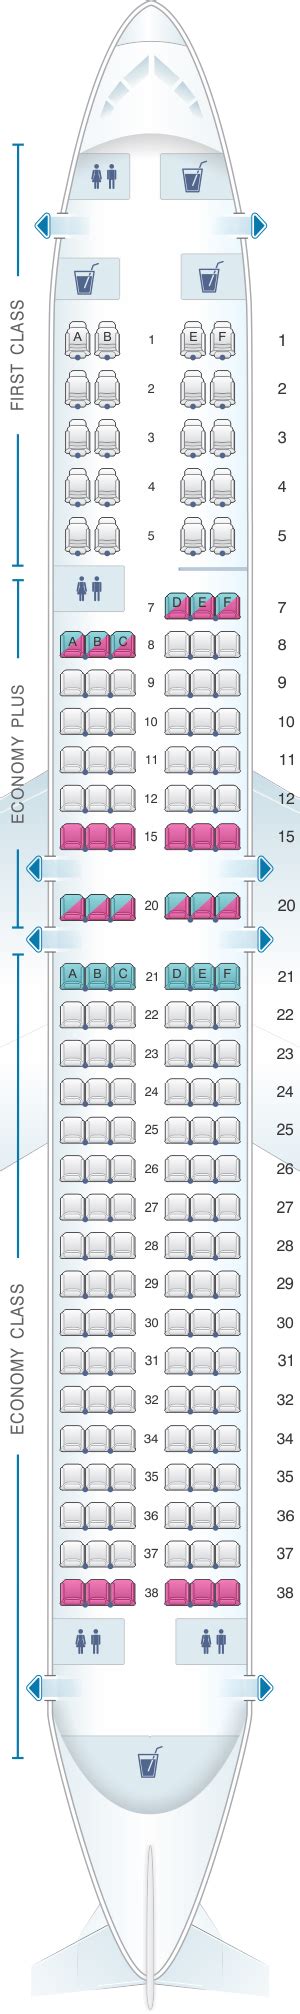 United Airlines Boeing 737 900 Seating Plan Review Home Decor